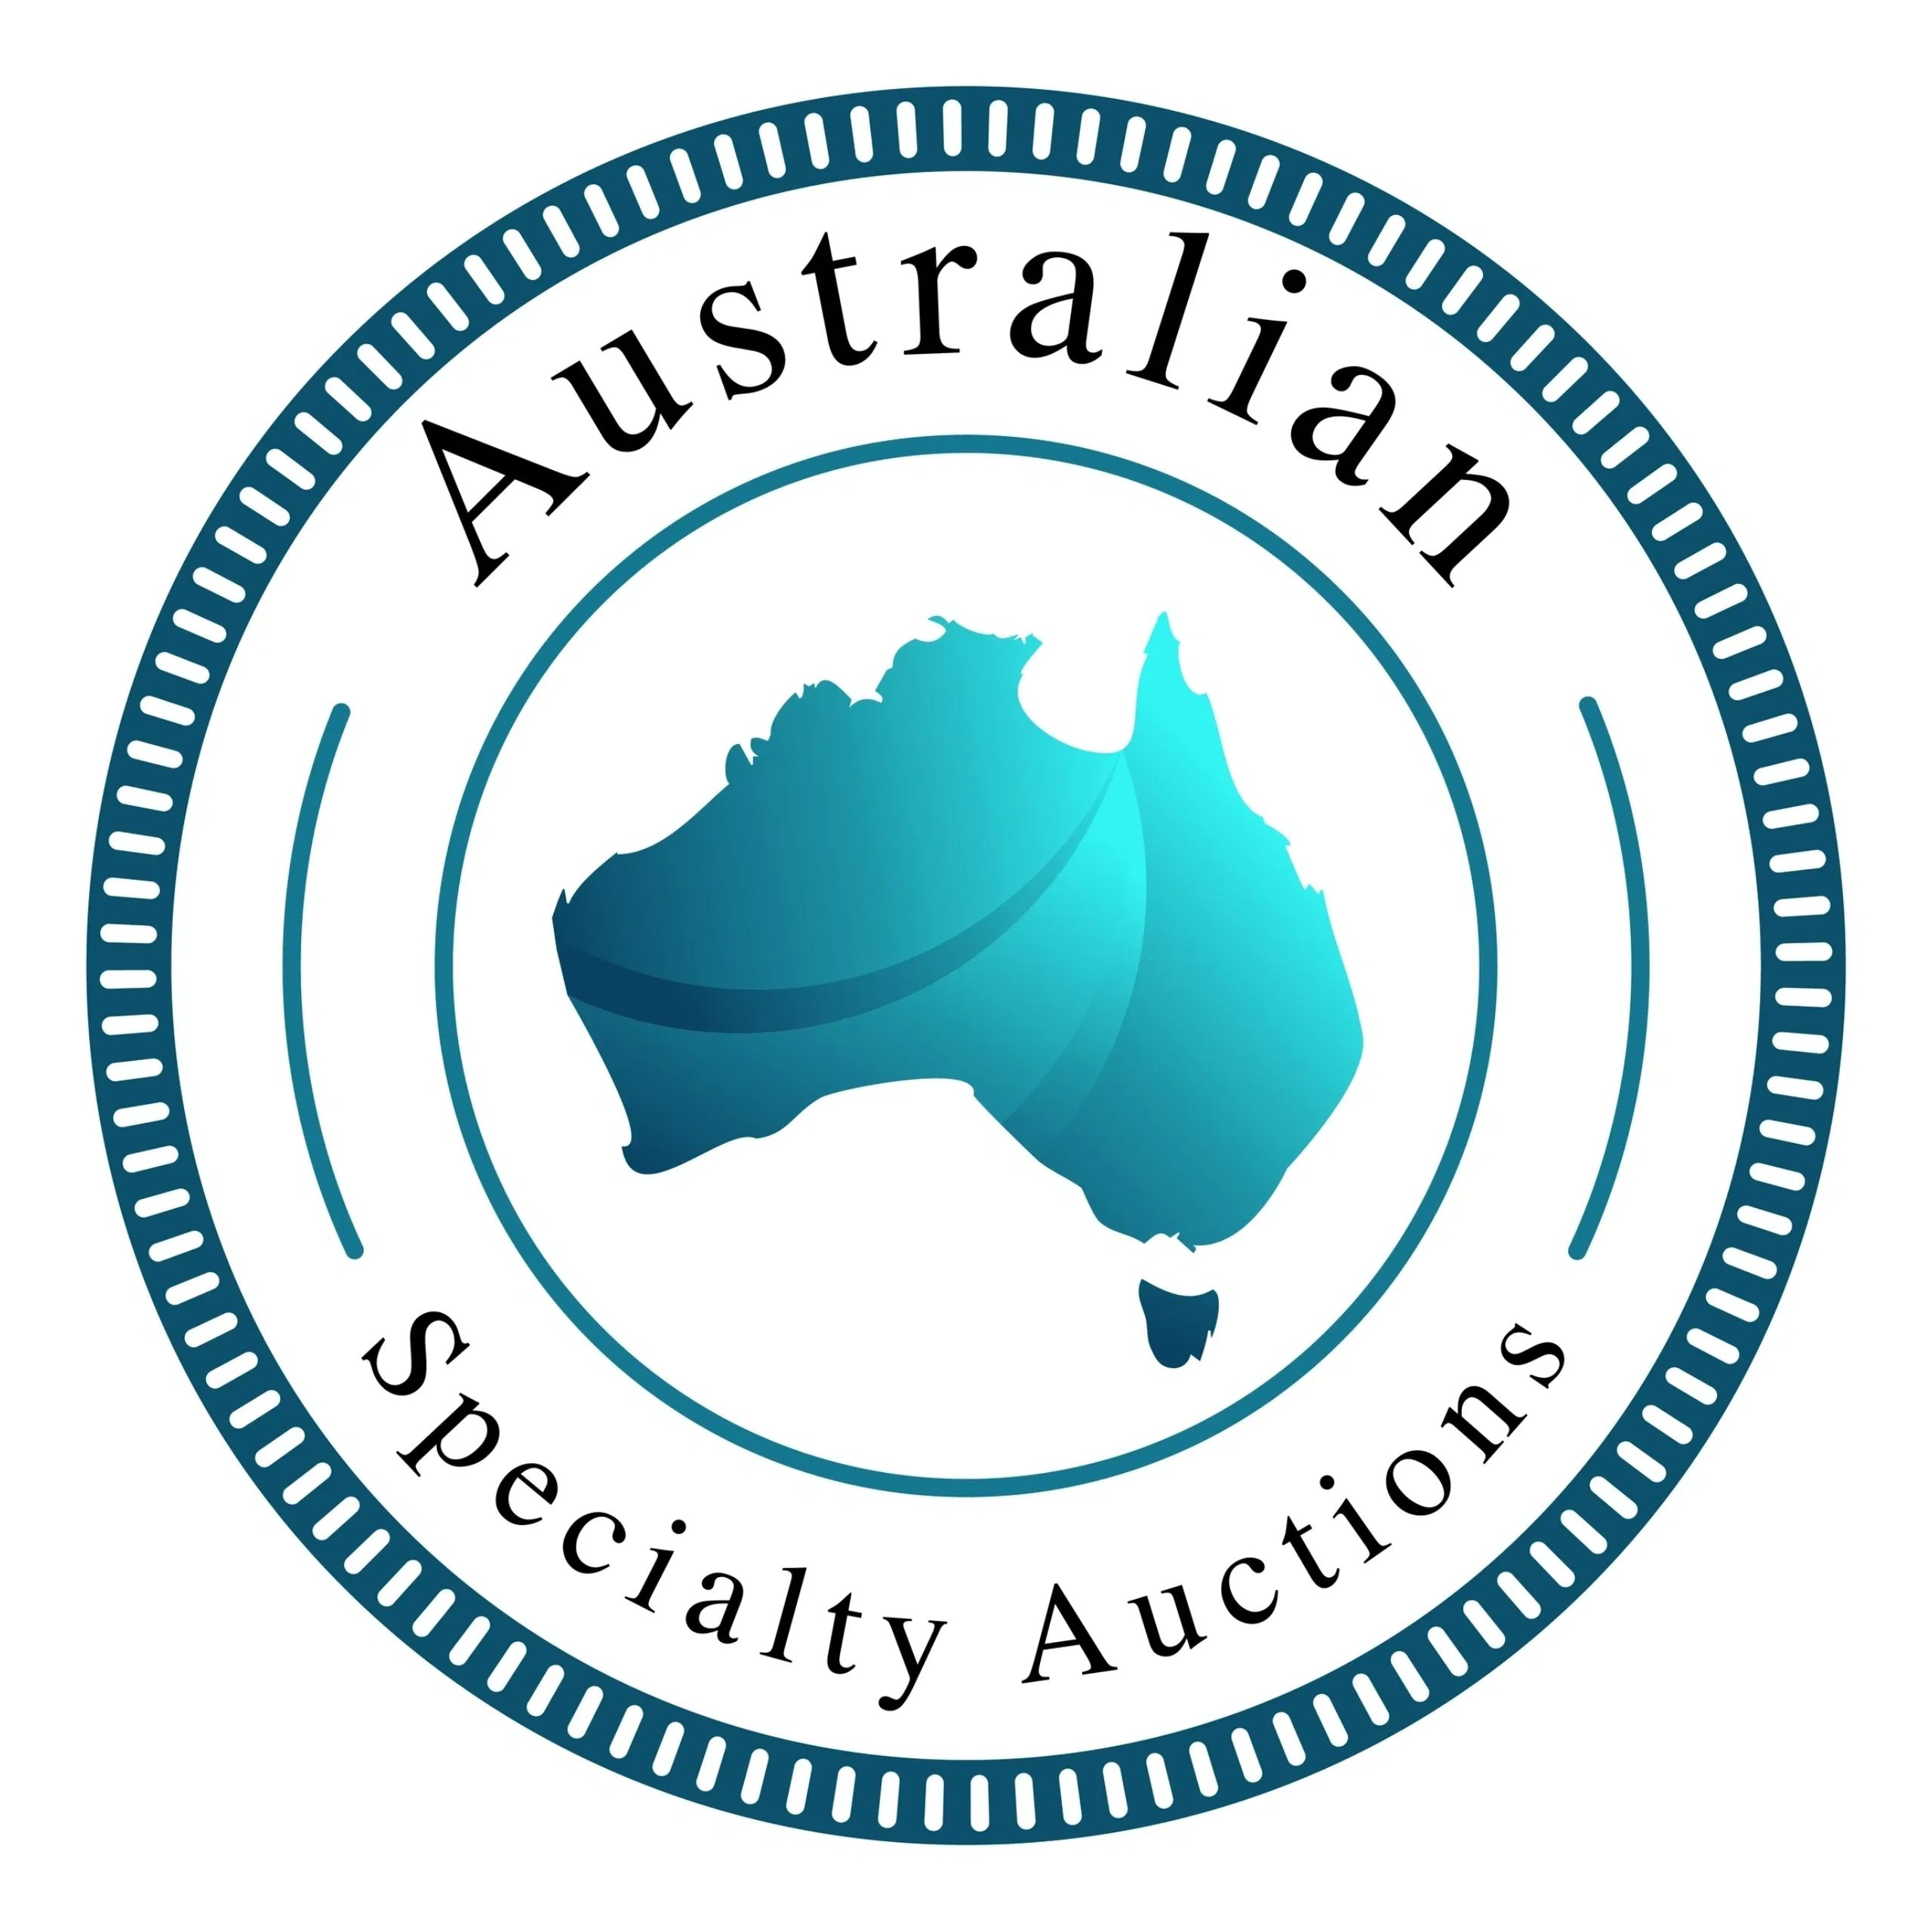 Coins, Banknotes and Collectables - Australian Specialty Auctions